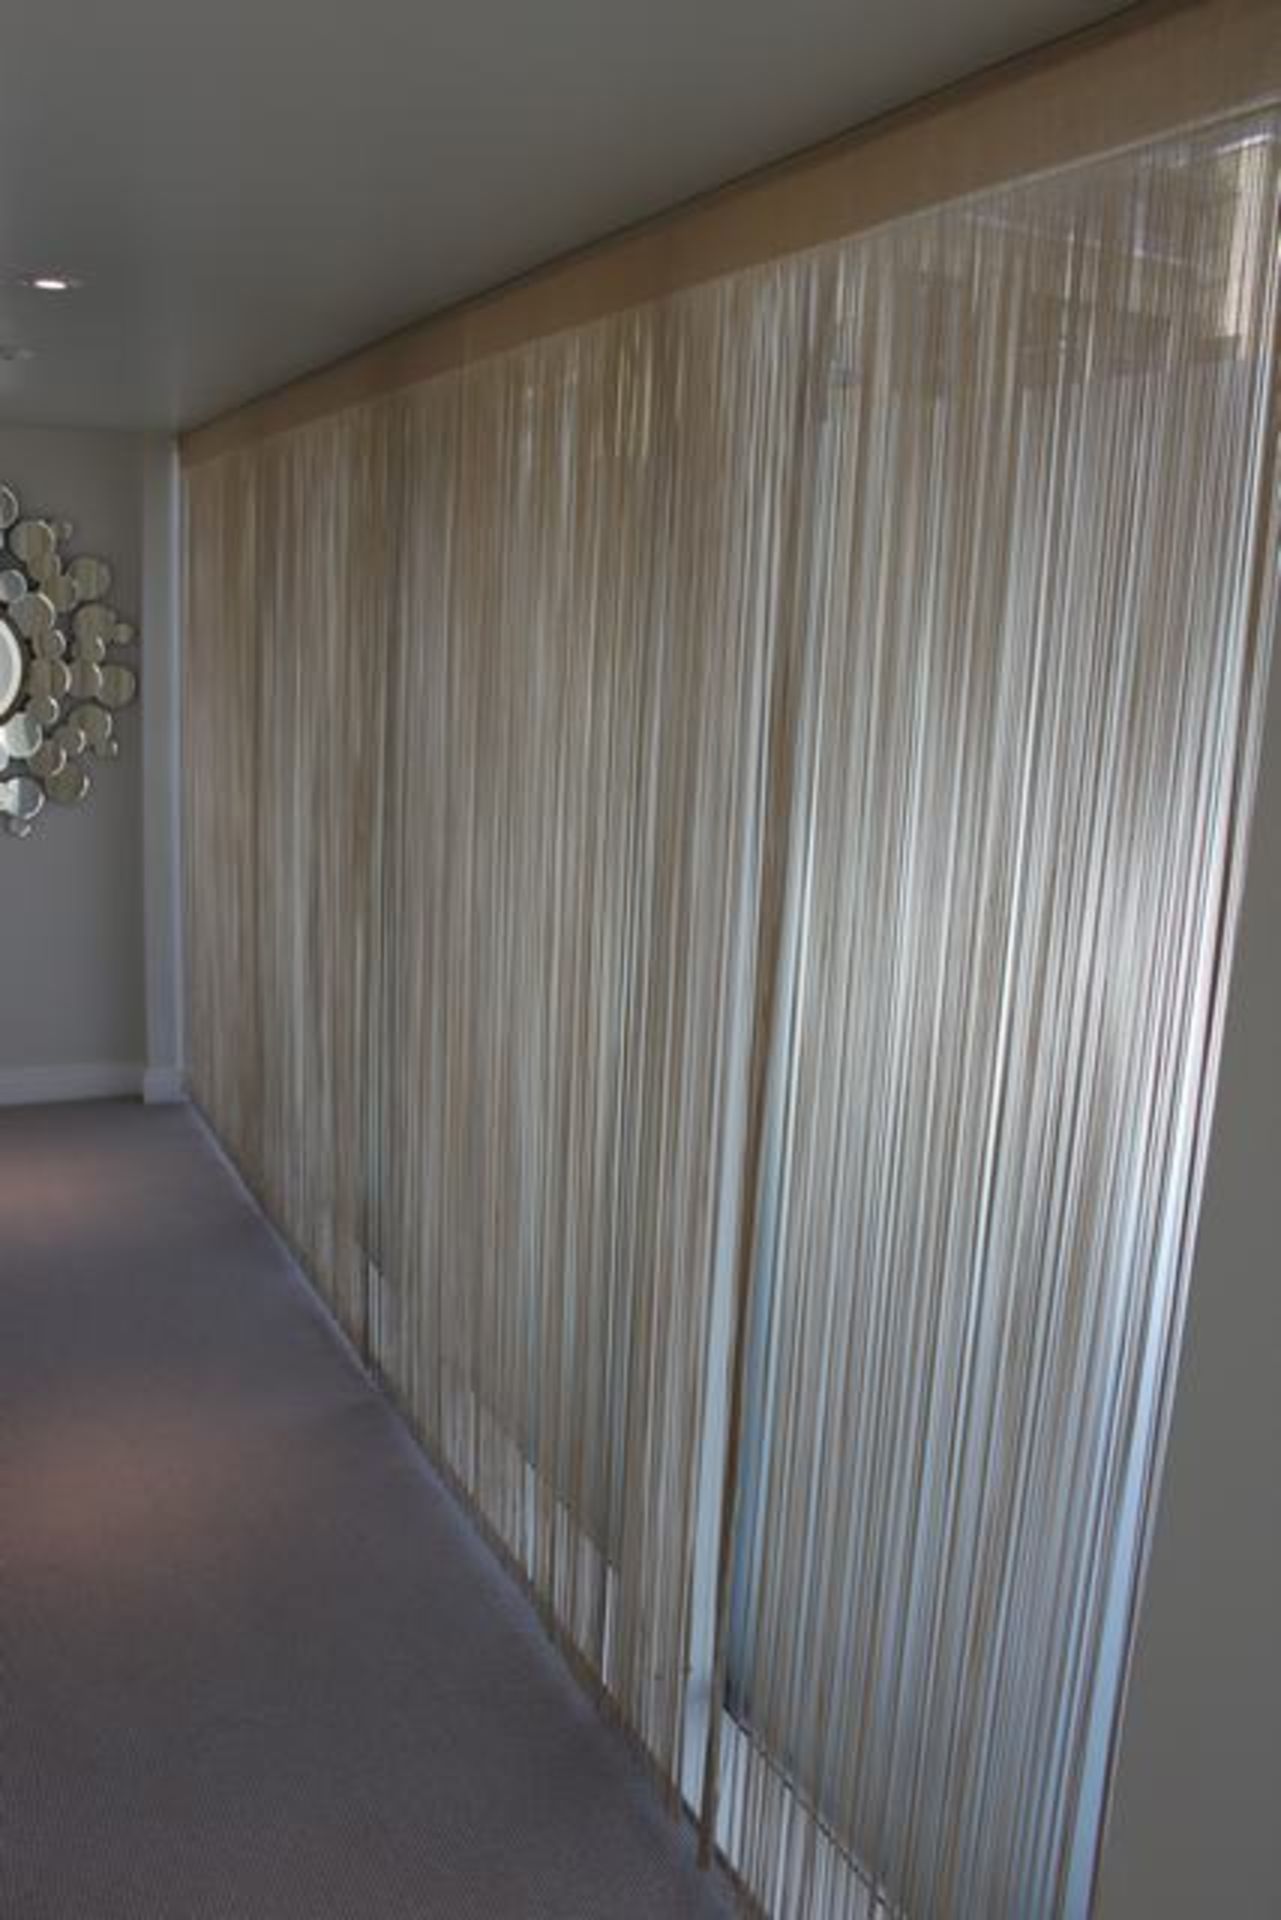 Voile string curtain panel 4600mm x 2200mm